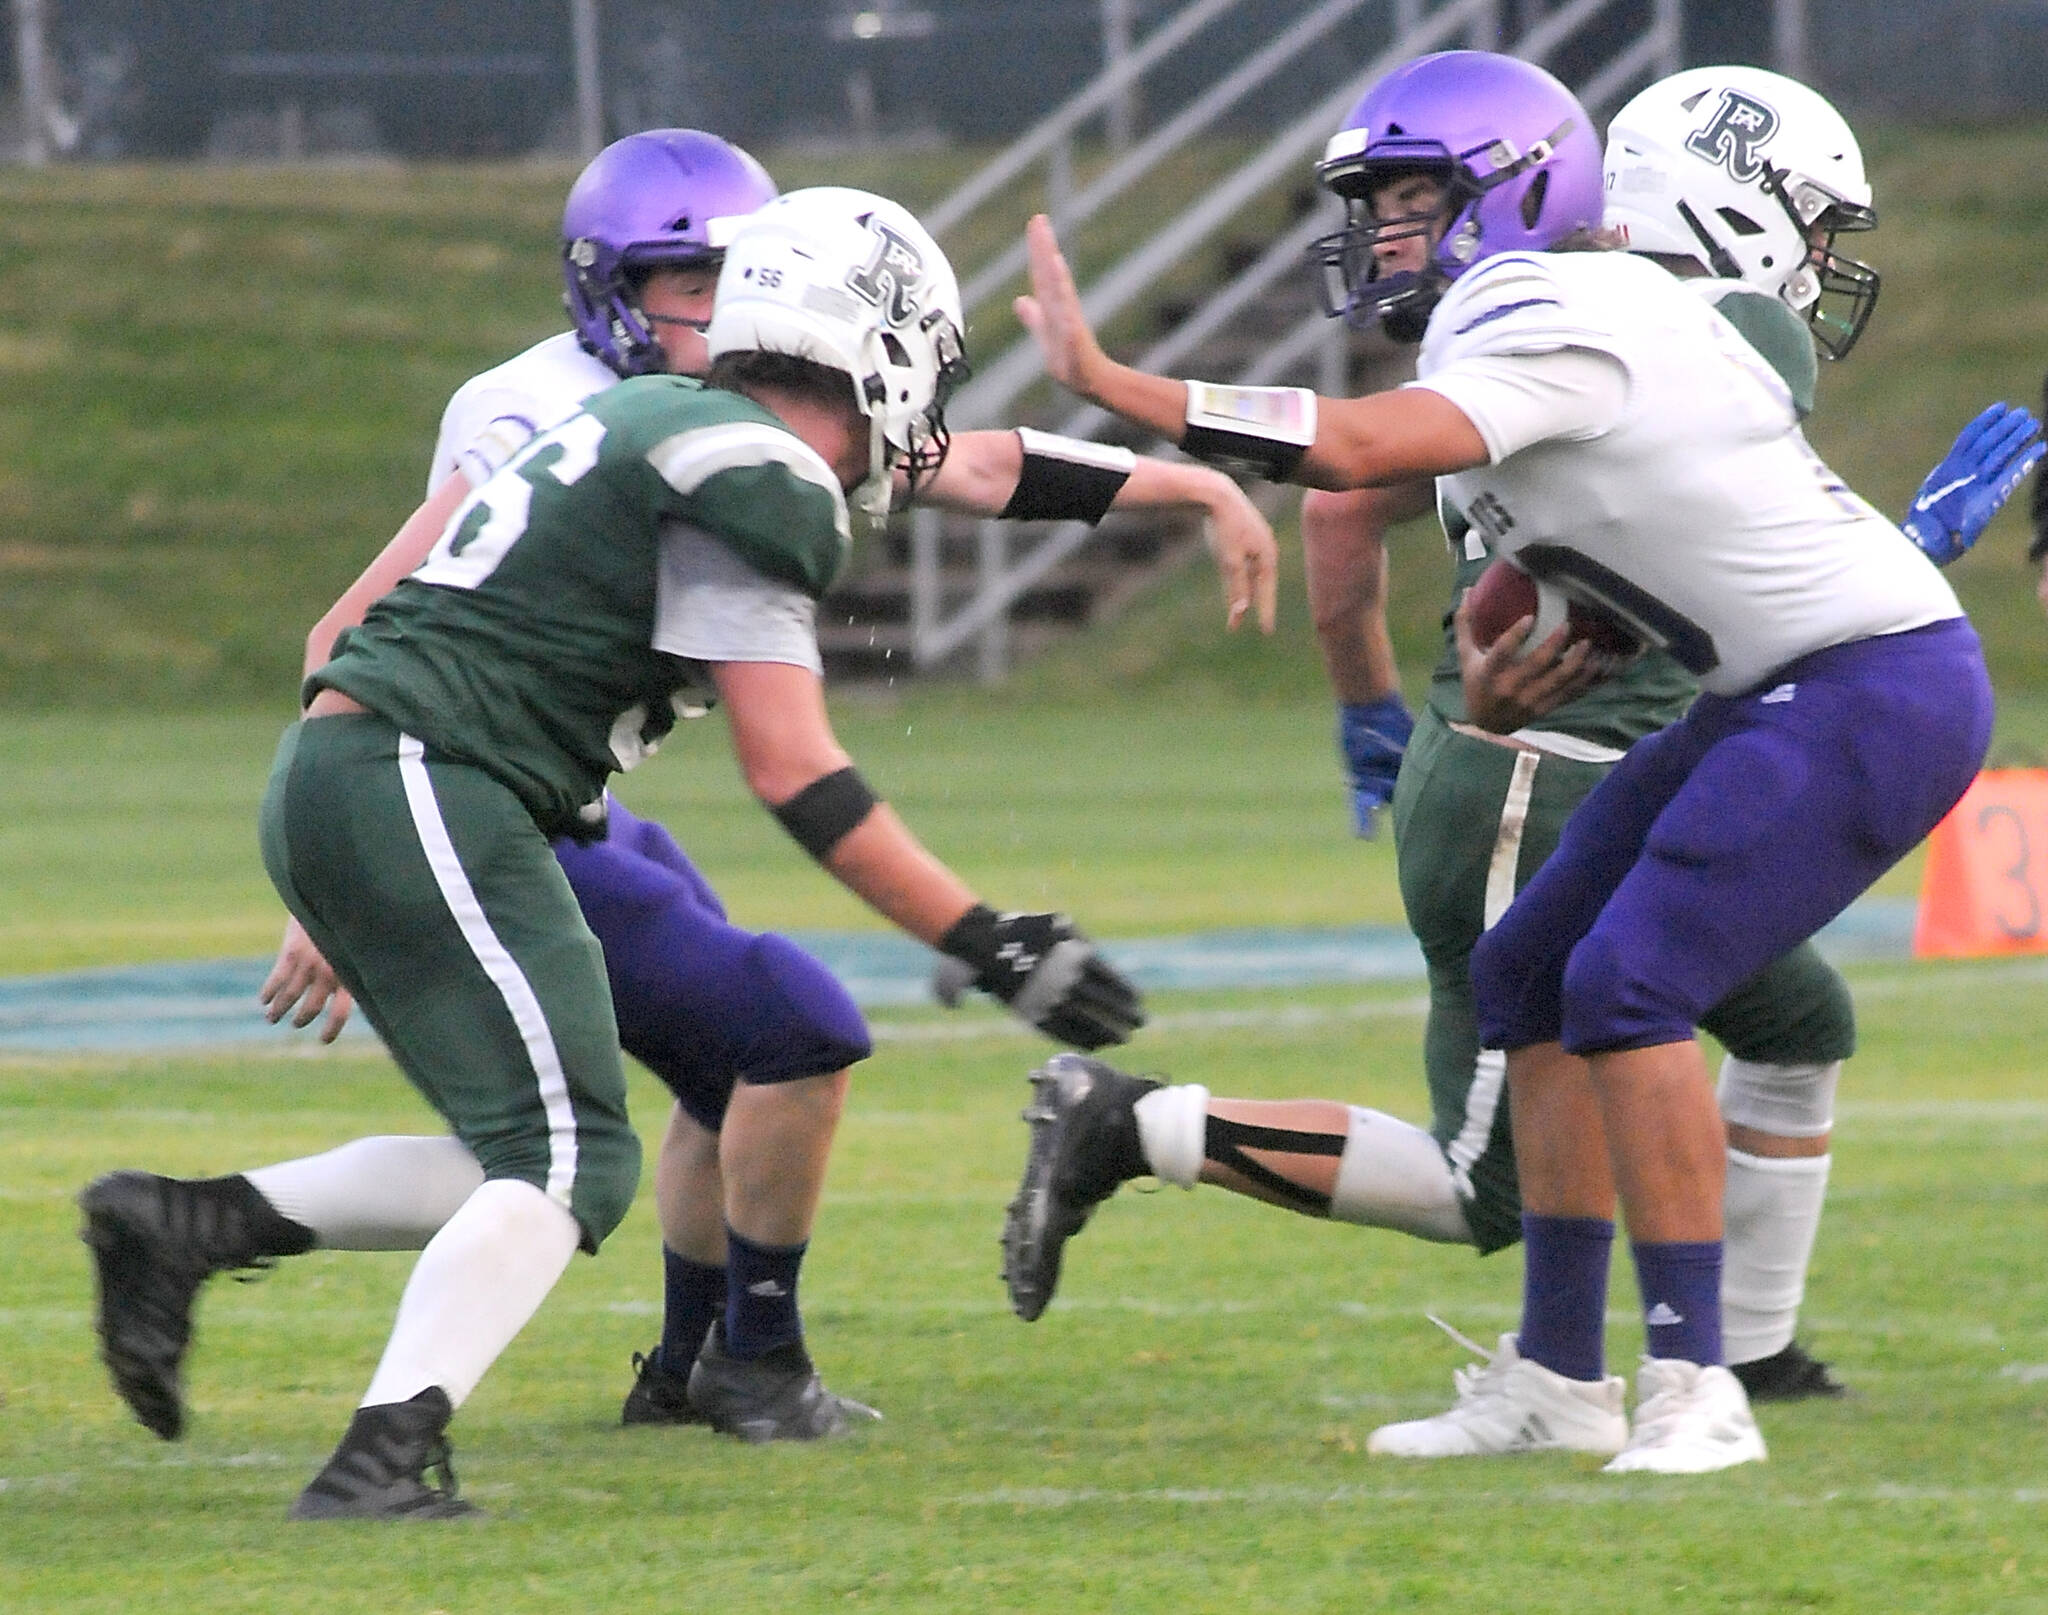 KEITH THORPE/PENINSULA DAILY NEWS
Sequim quarterback Lars Wiker, right, fends of the defense of Port Angeles' Tanner Flores on Friday night in Port Angeles.